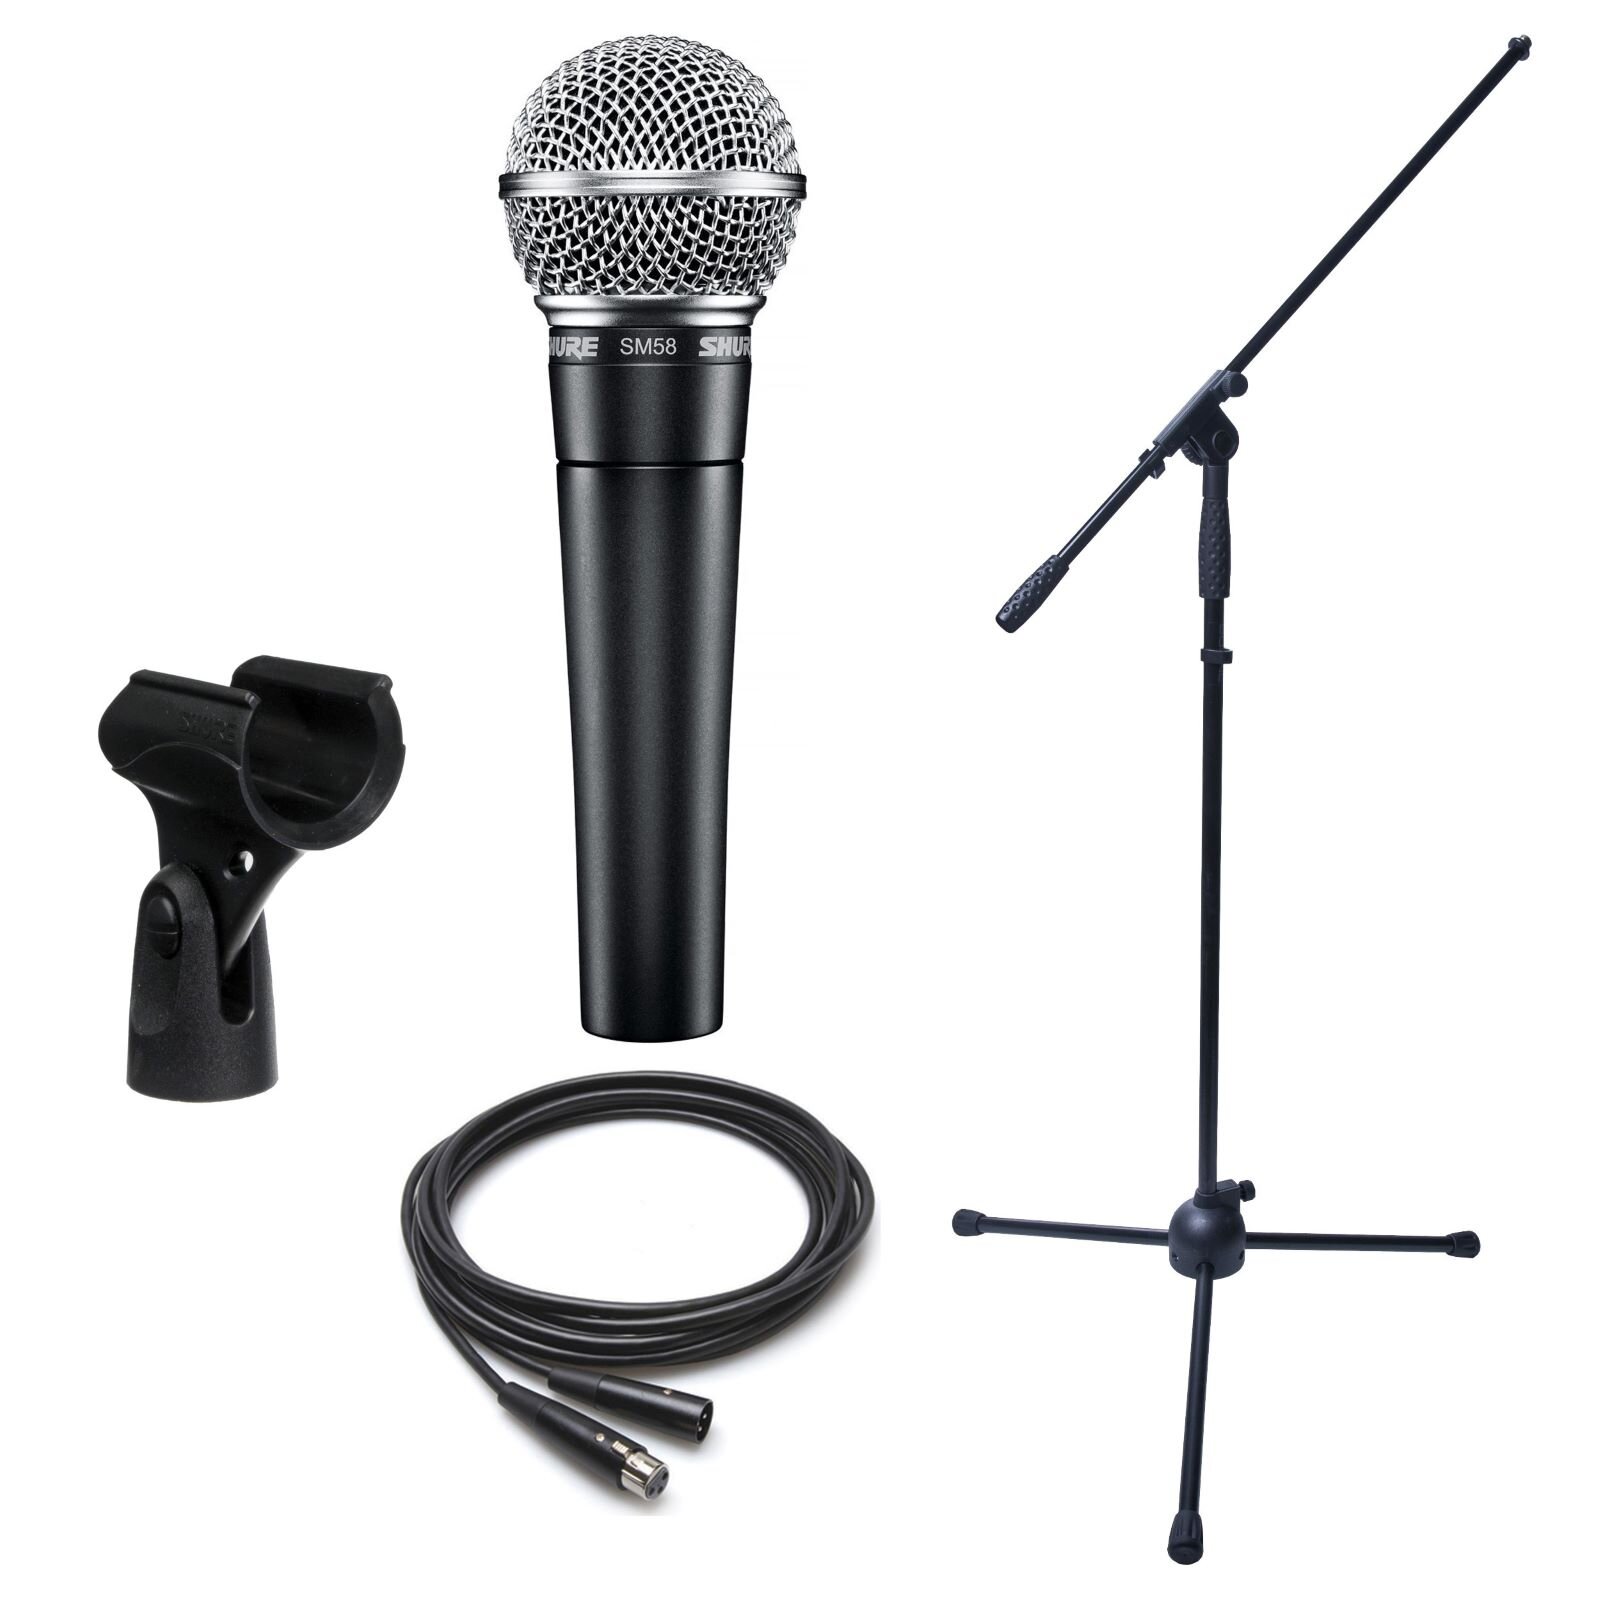 Shure Microphone Stand, SM58, Microphone Clip, Sommer XLR Cable (SM58-BUNDLE) : photo 1